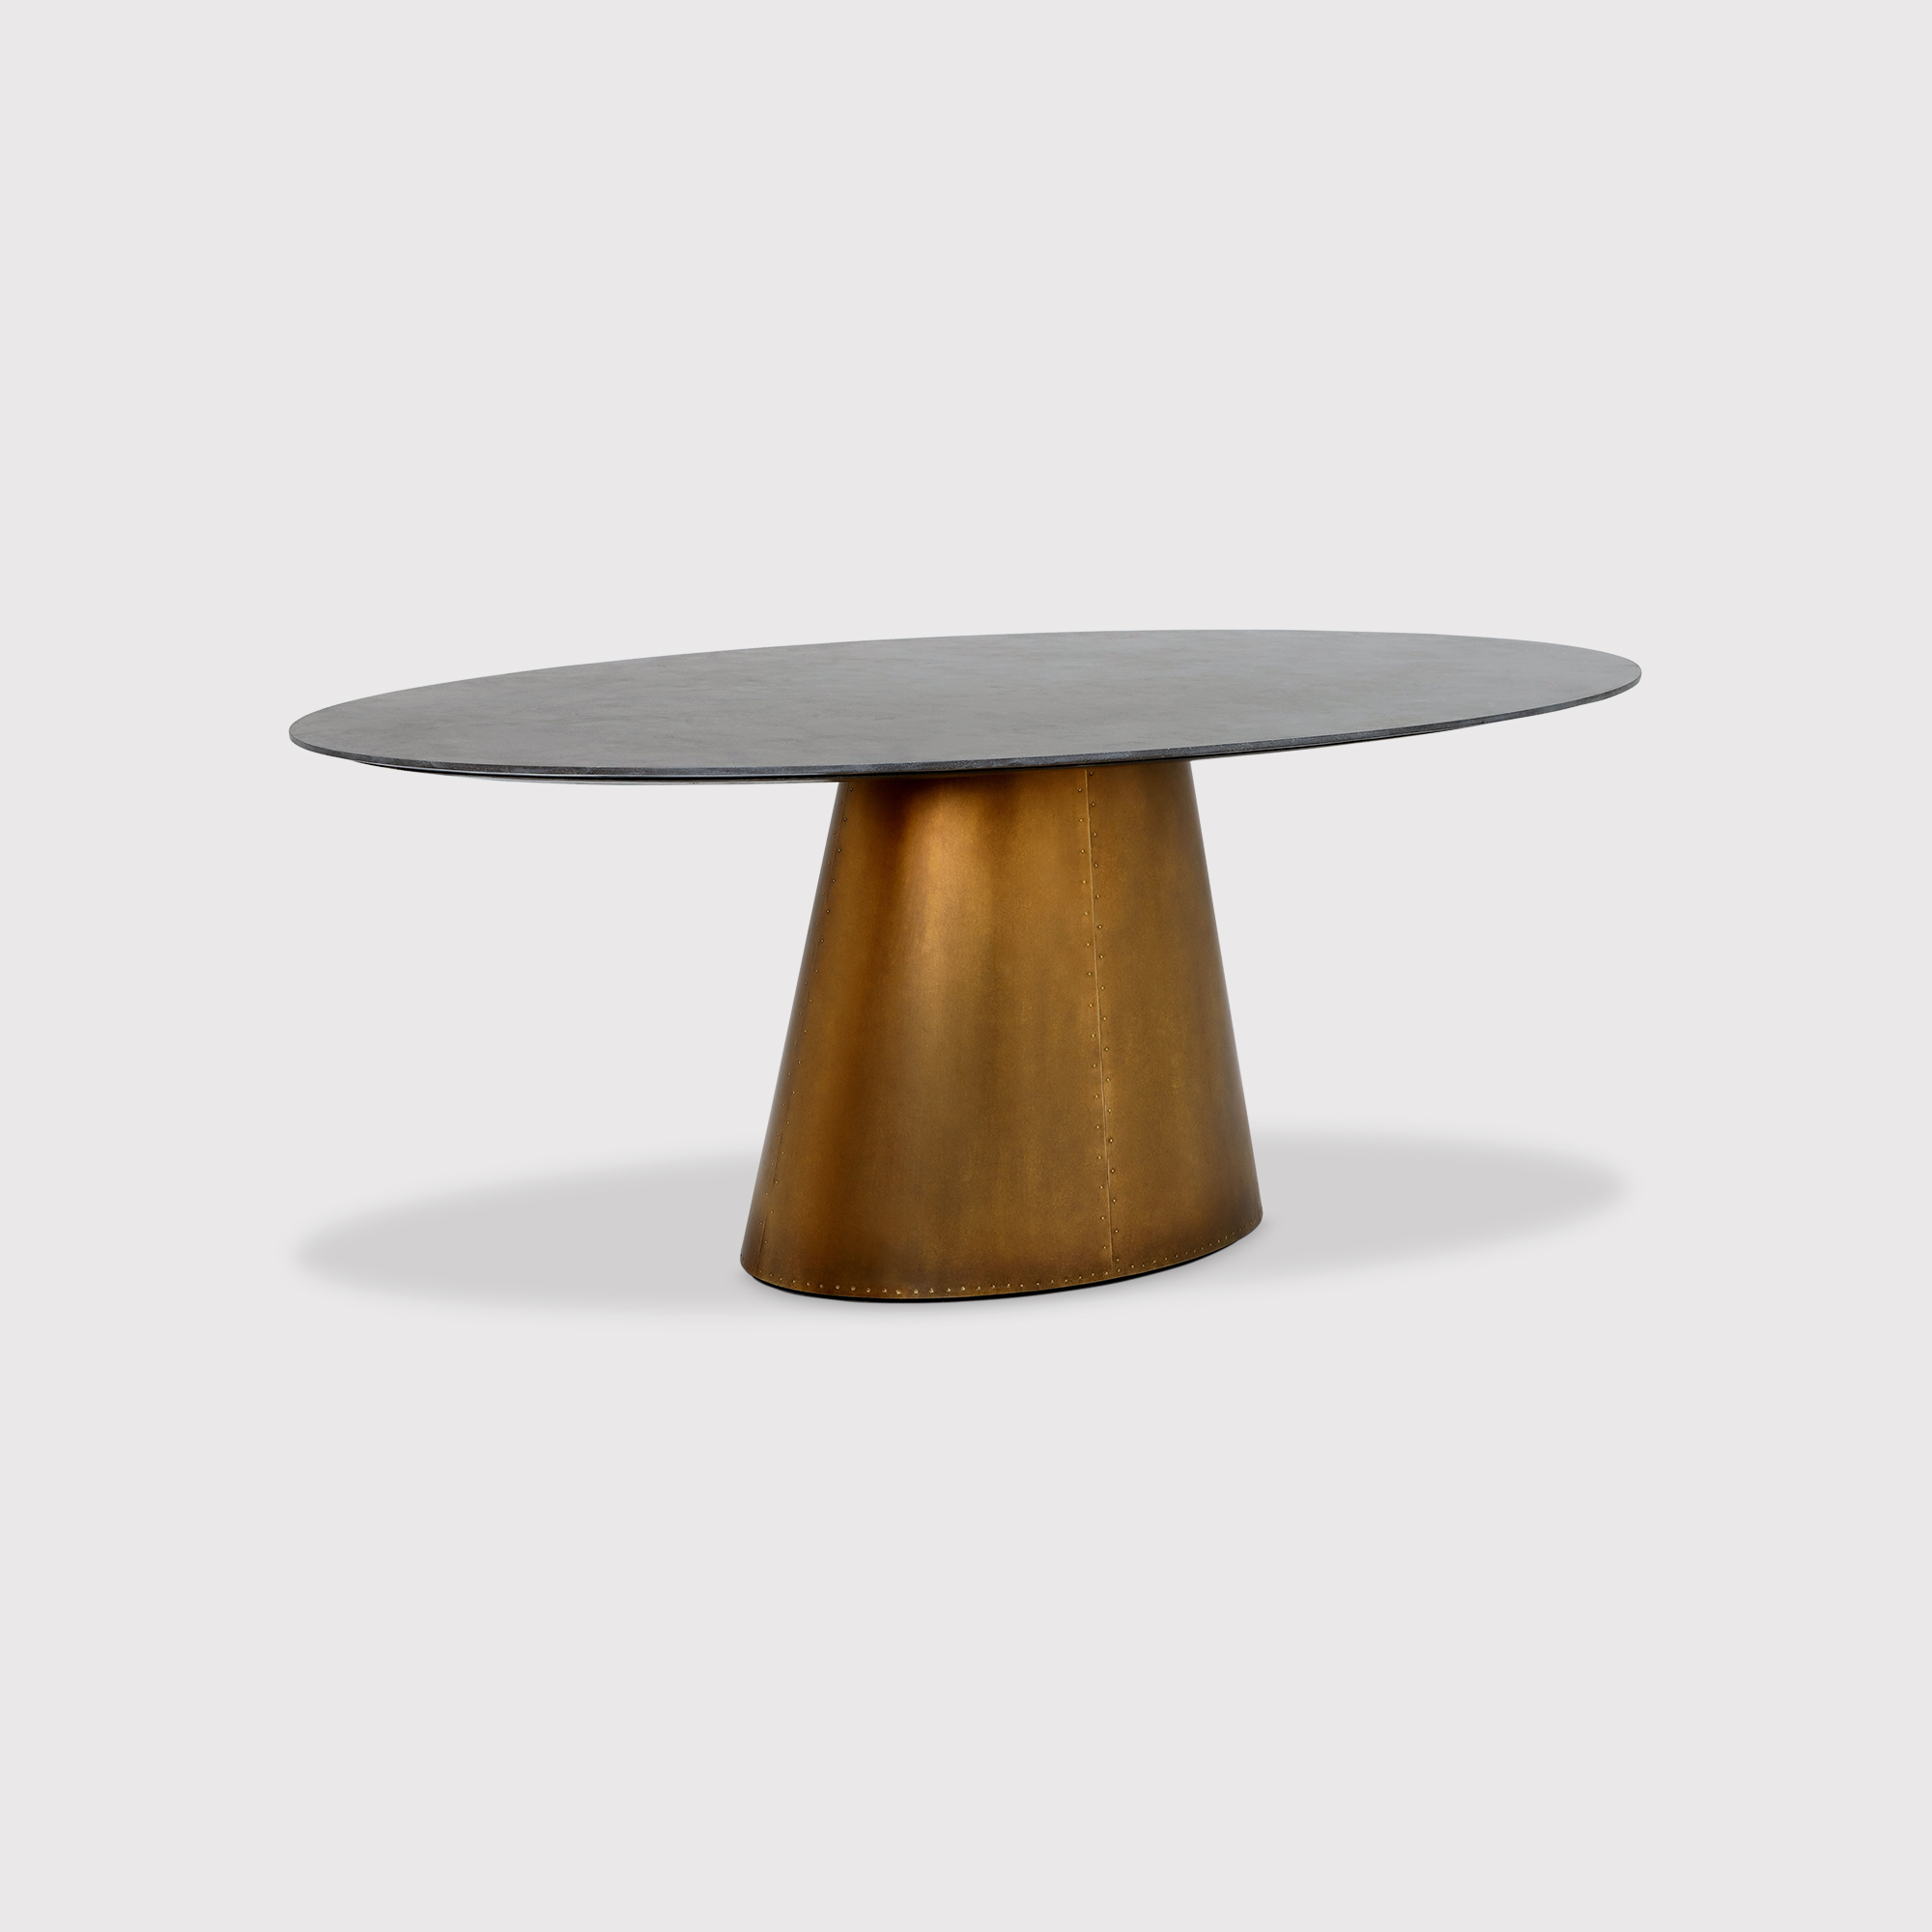 Janco Oval Dining Table, Grey Stone | Barker & Stonehouse